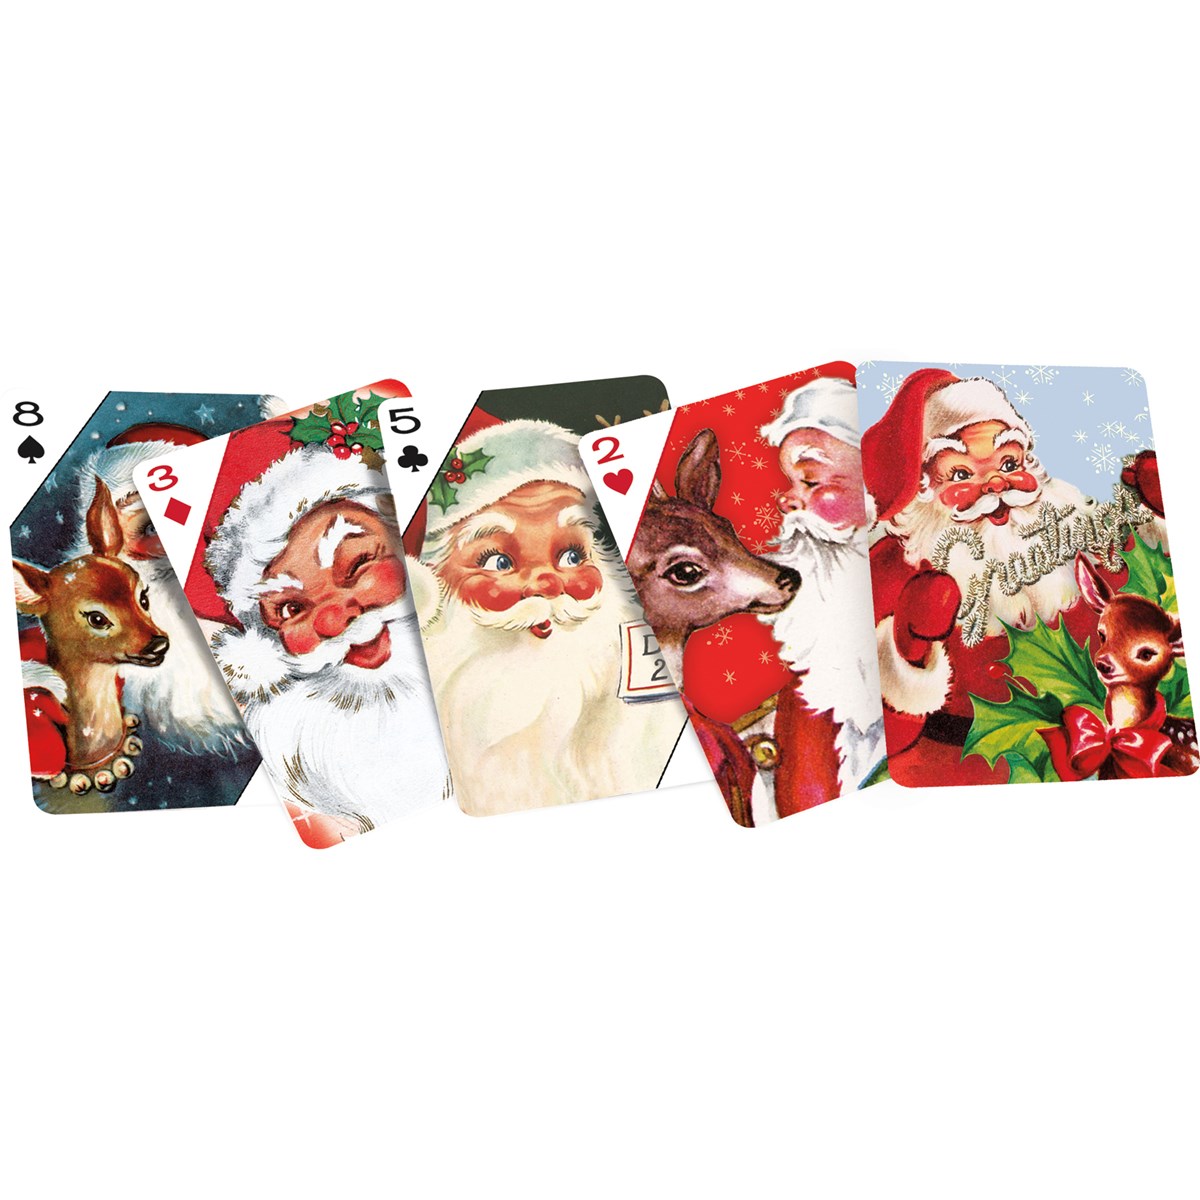 Santa Claus Playing Cards - Paper, Acrylic